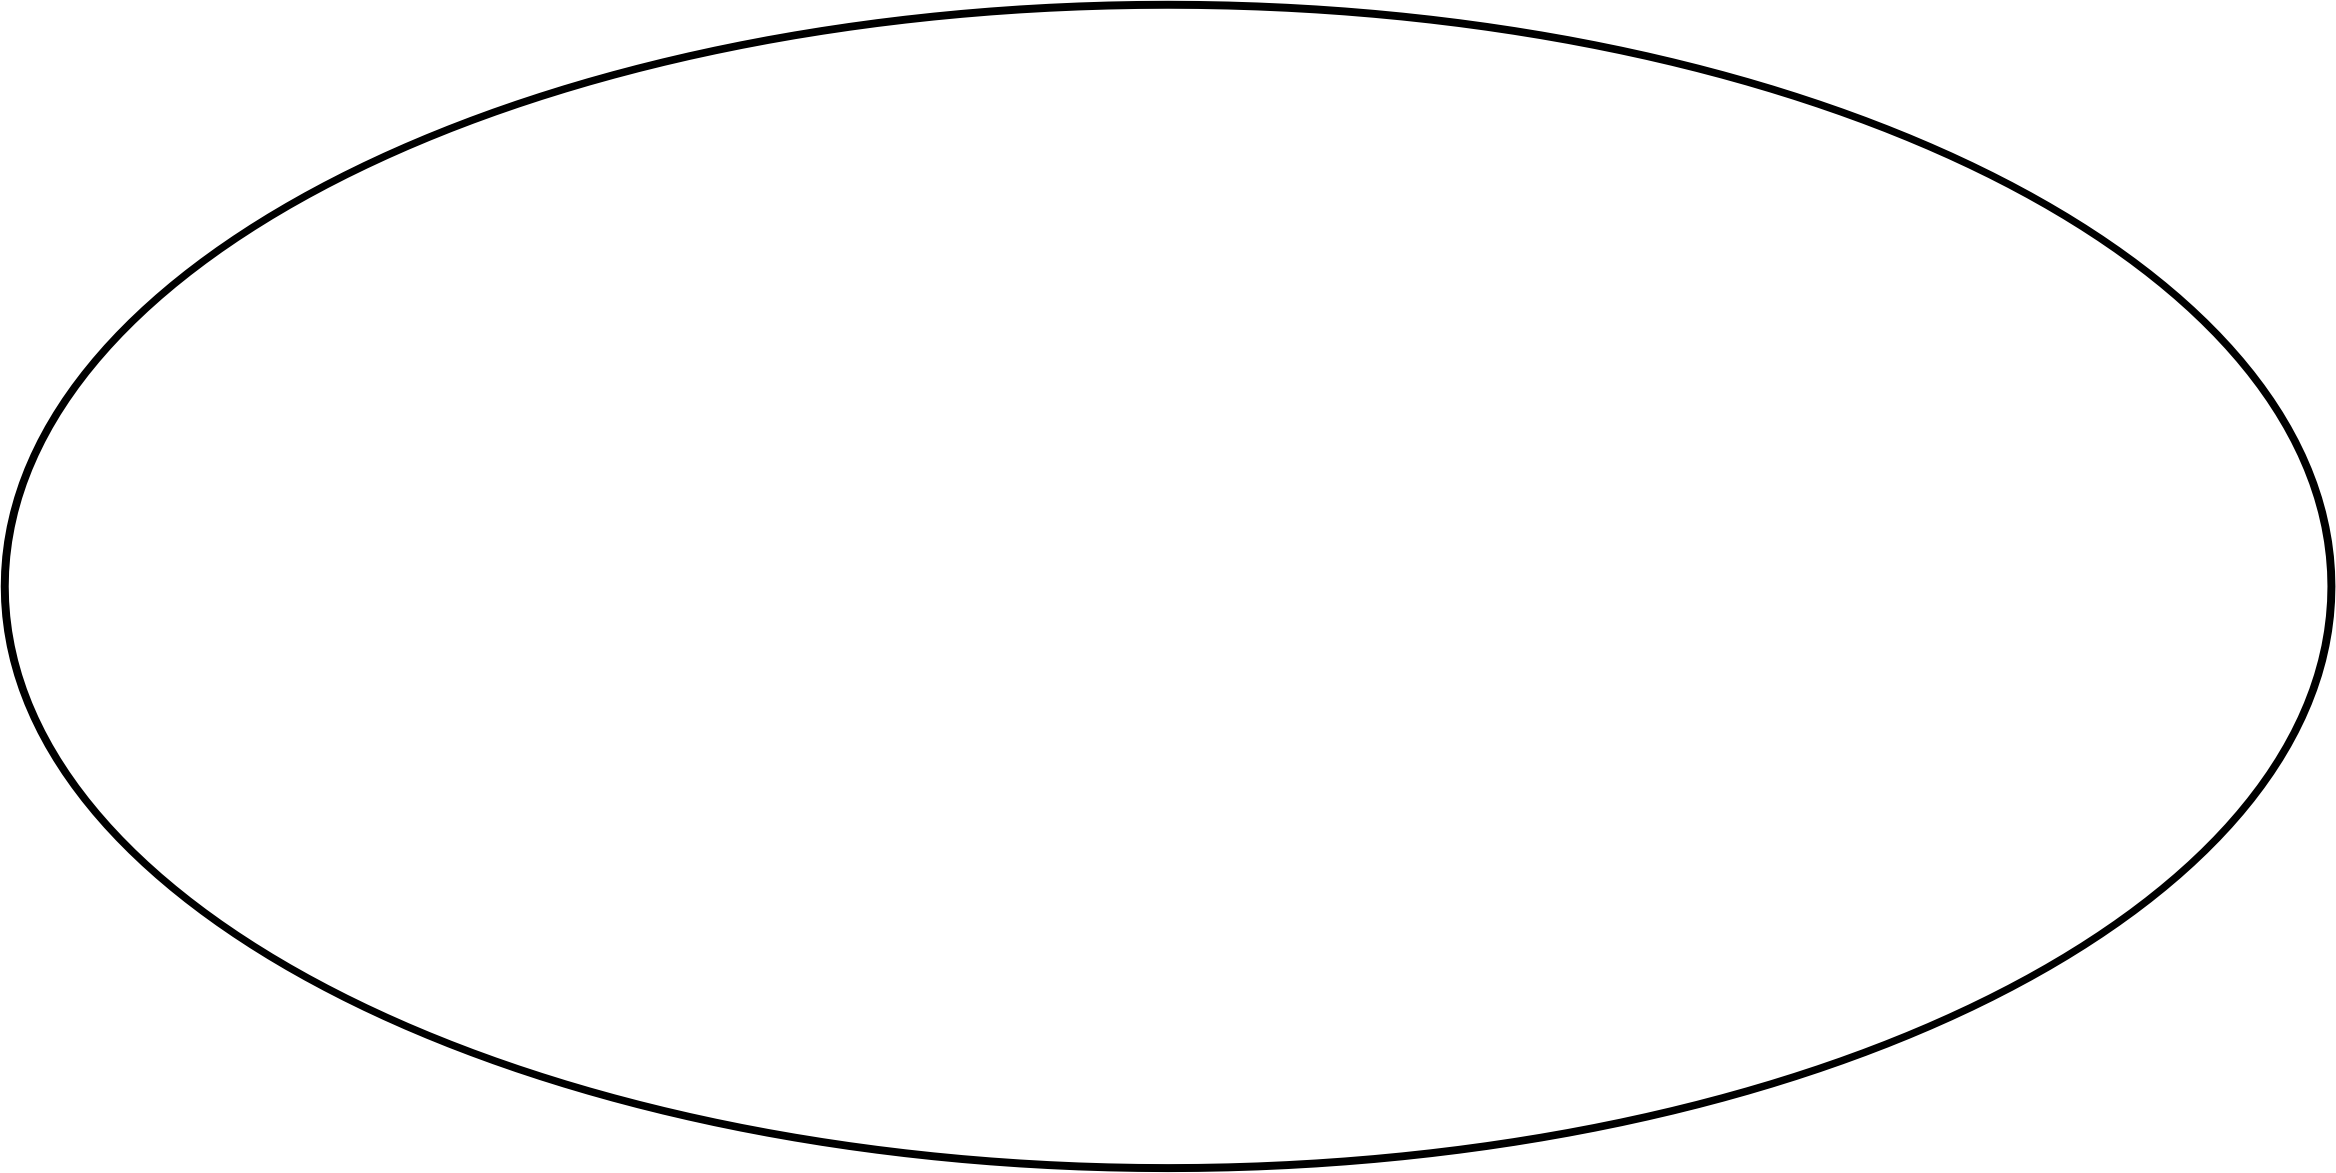 Oval clipart black and white, Oval black and white